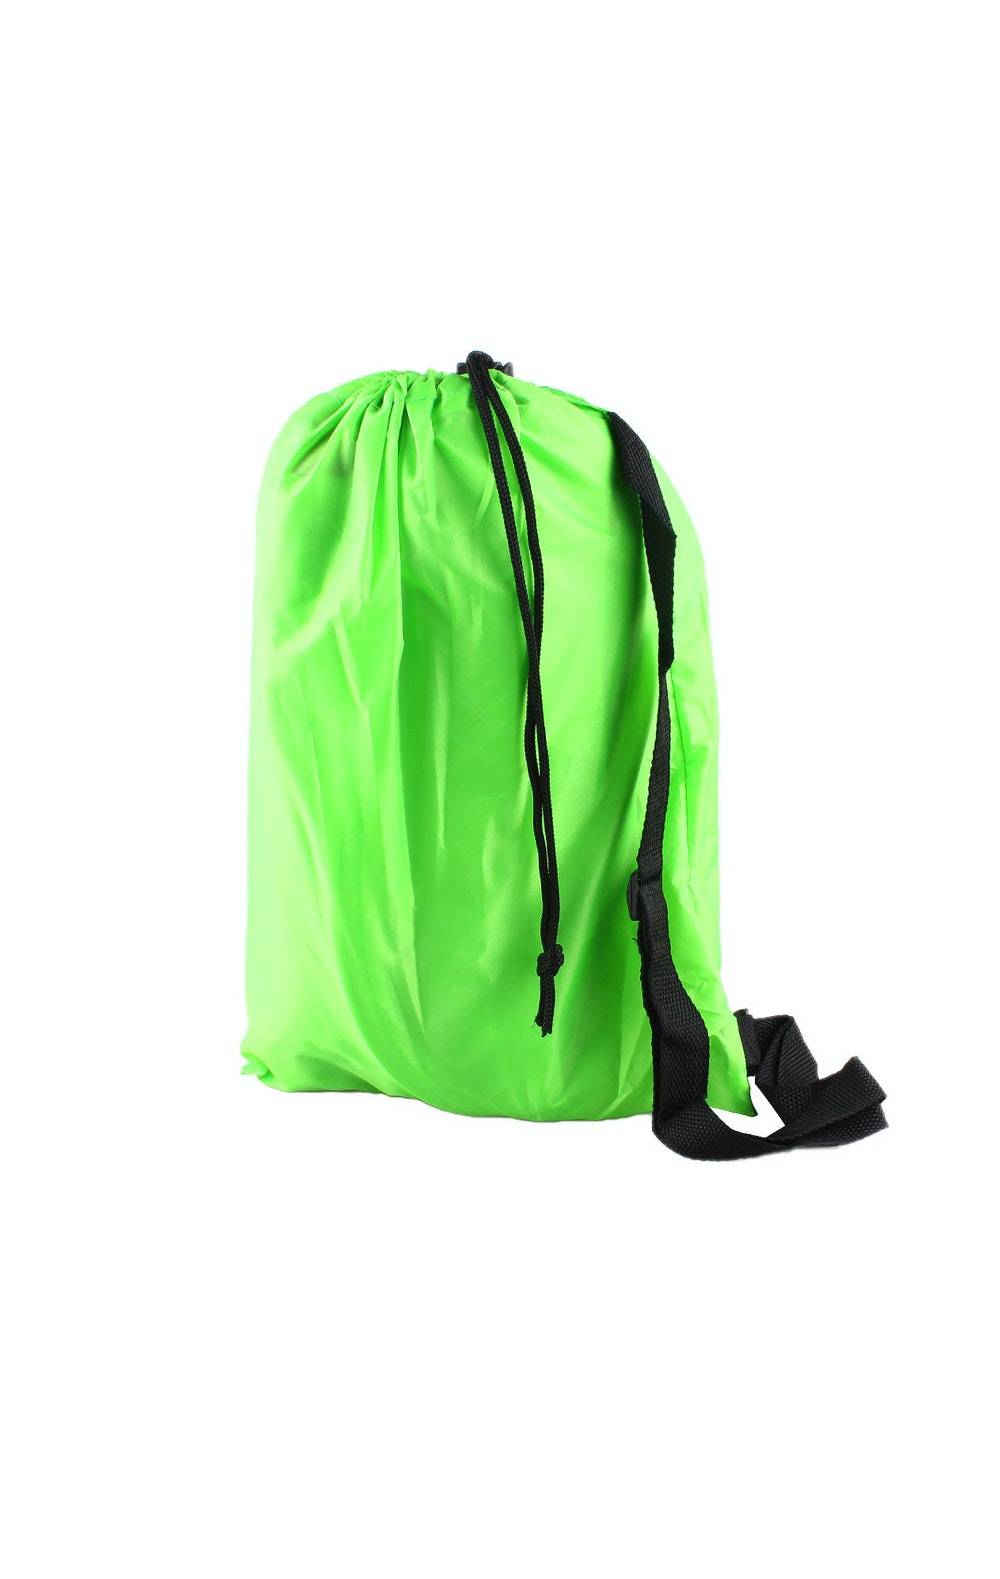 Onepiece Inflatable Lounge Bag Fluorescent Green  - 2